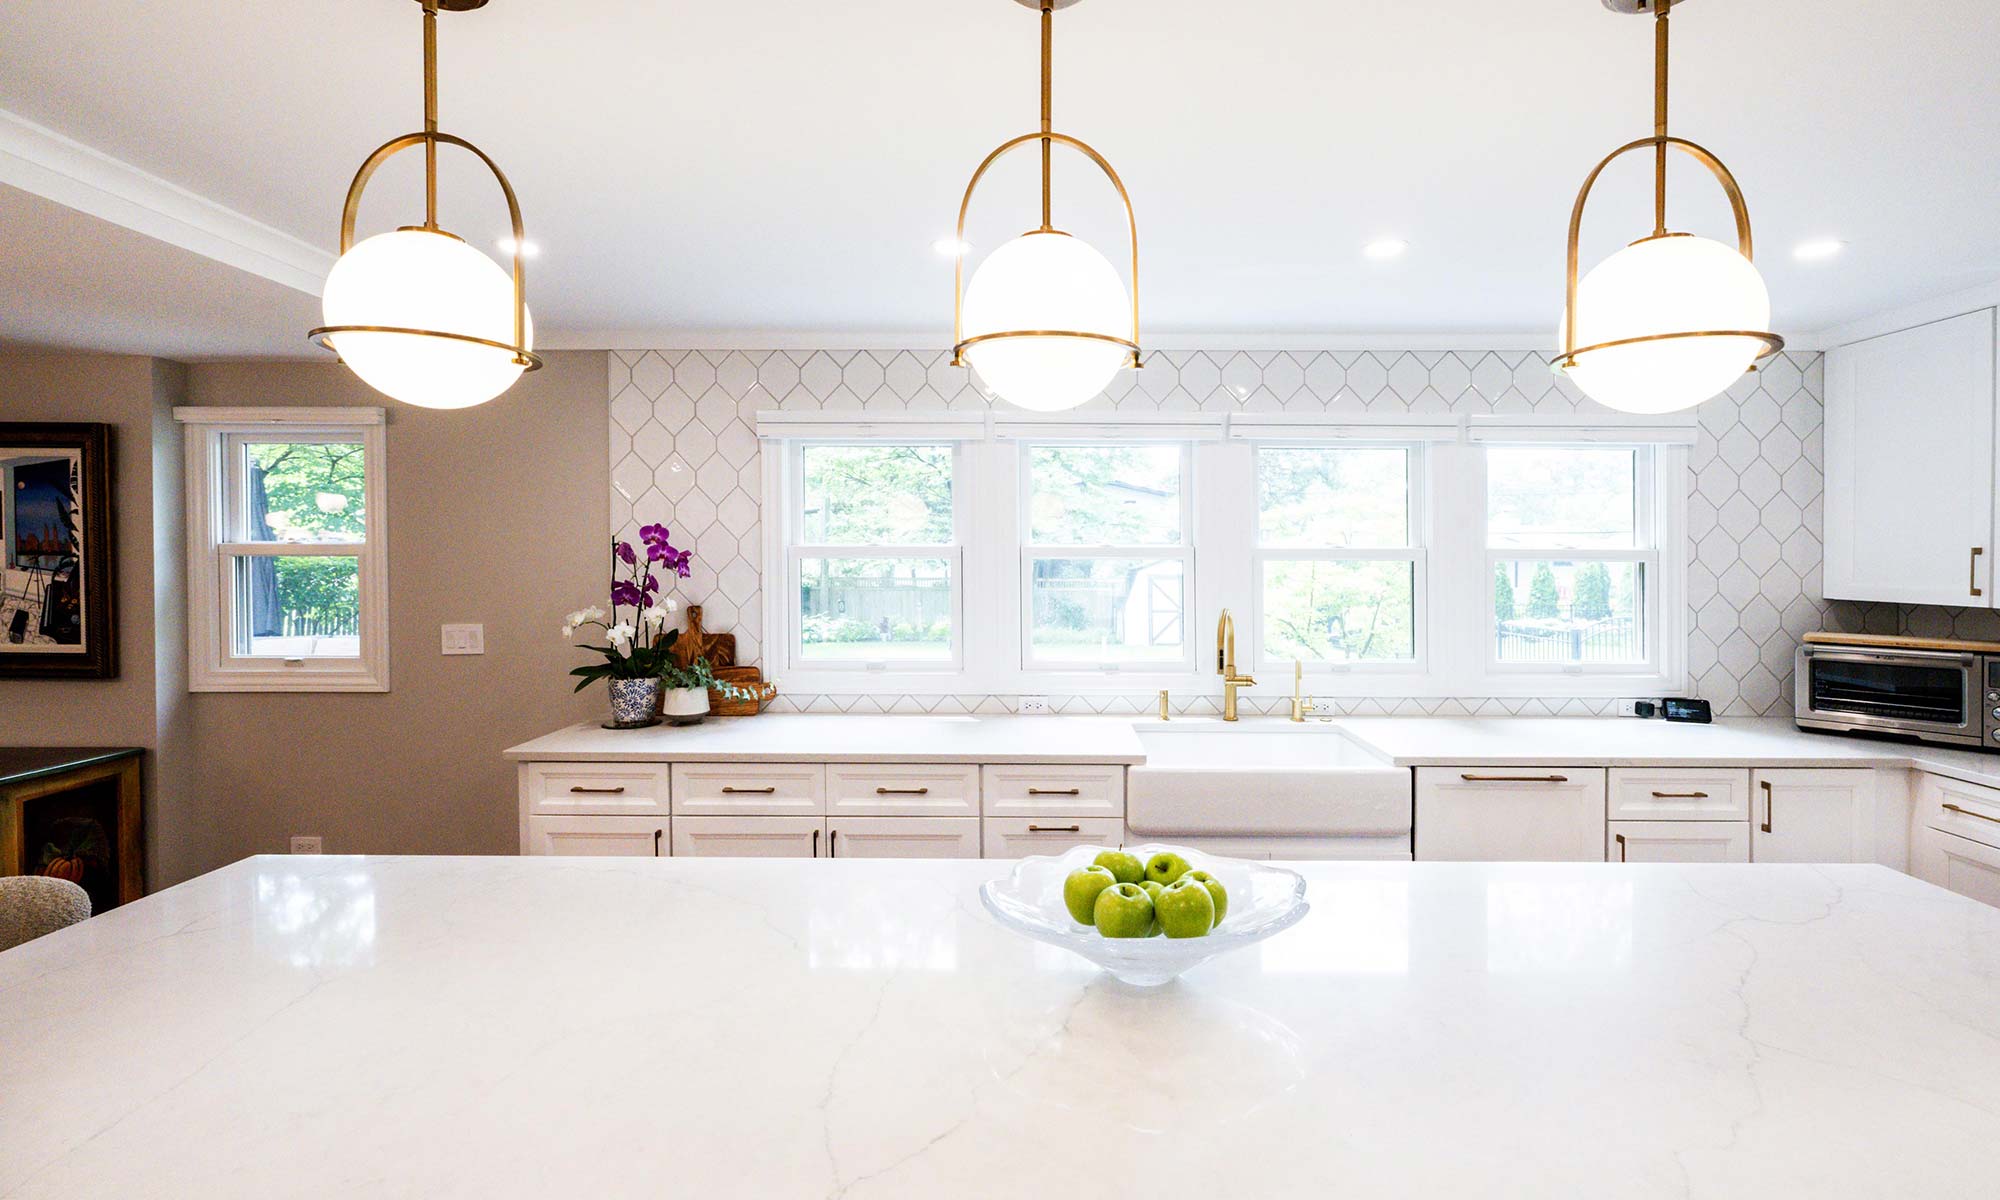 A kitchen with white cabinets and pendant lights